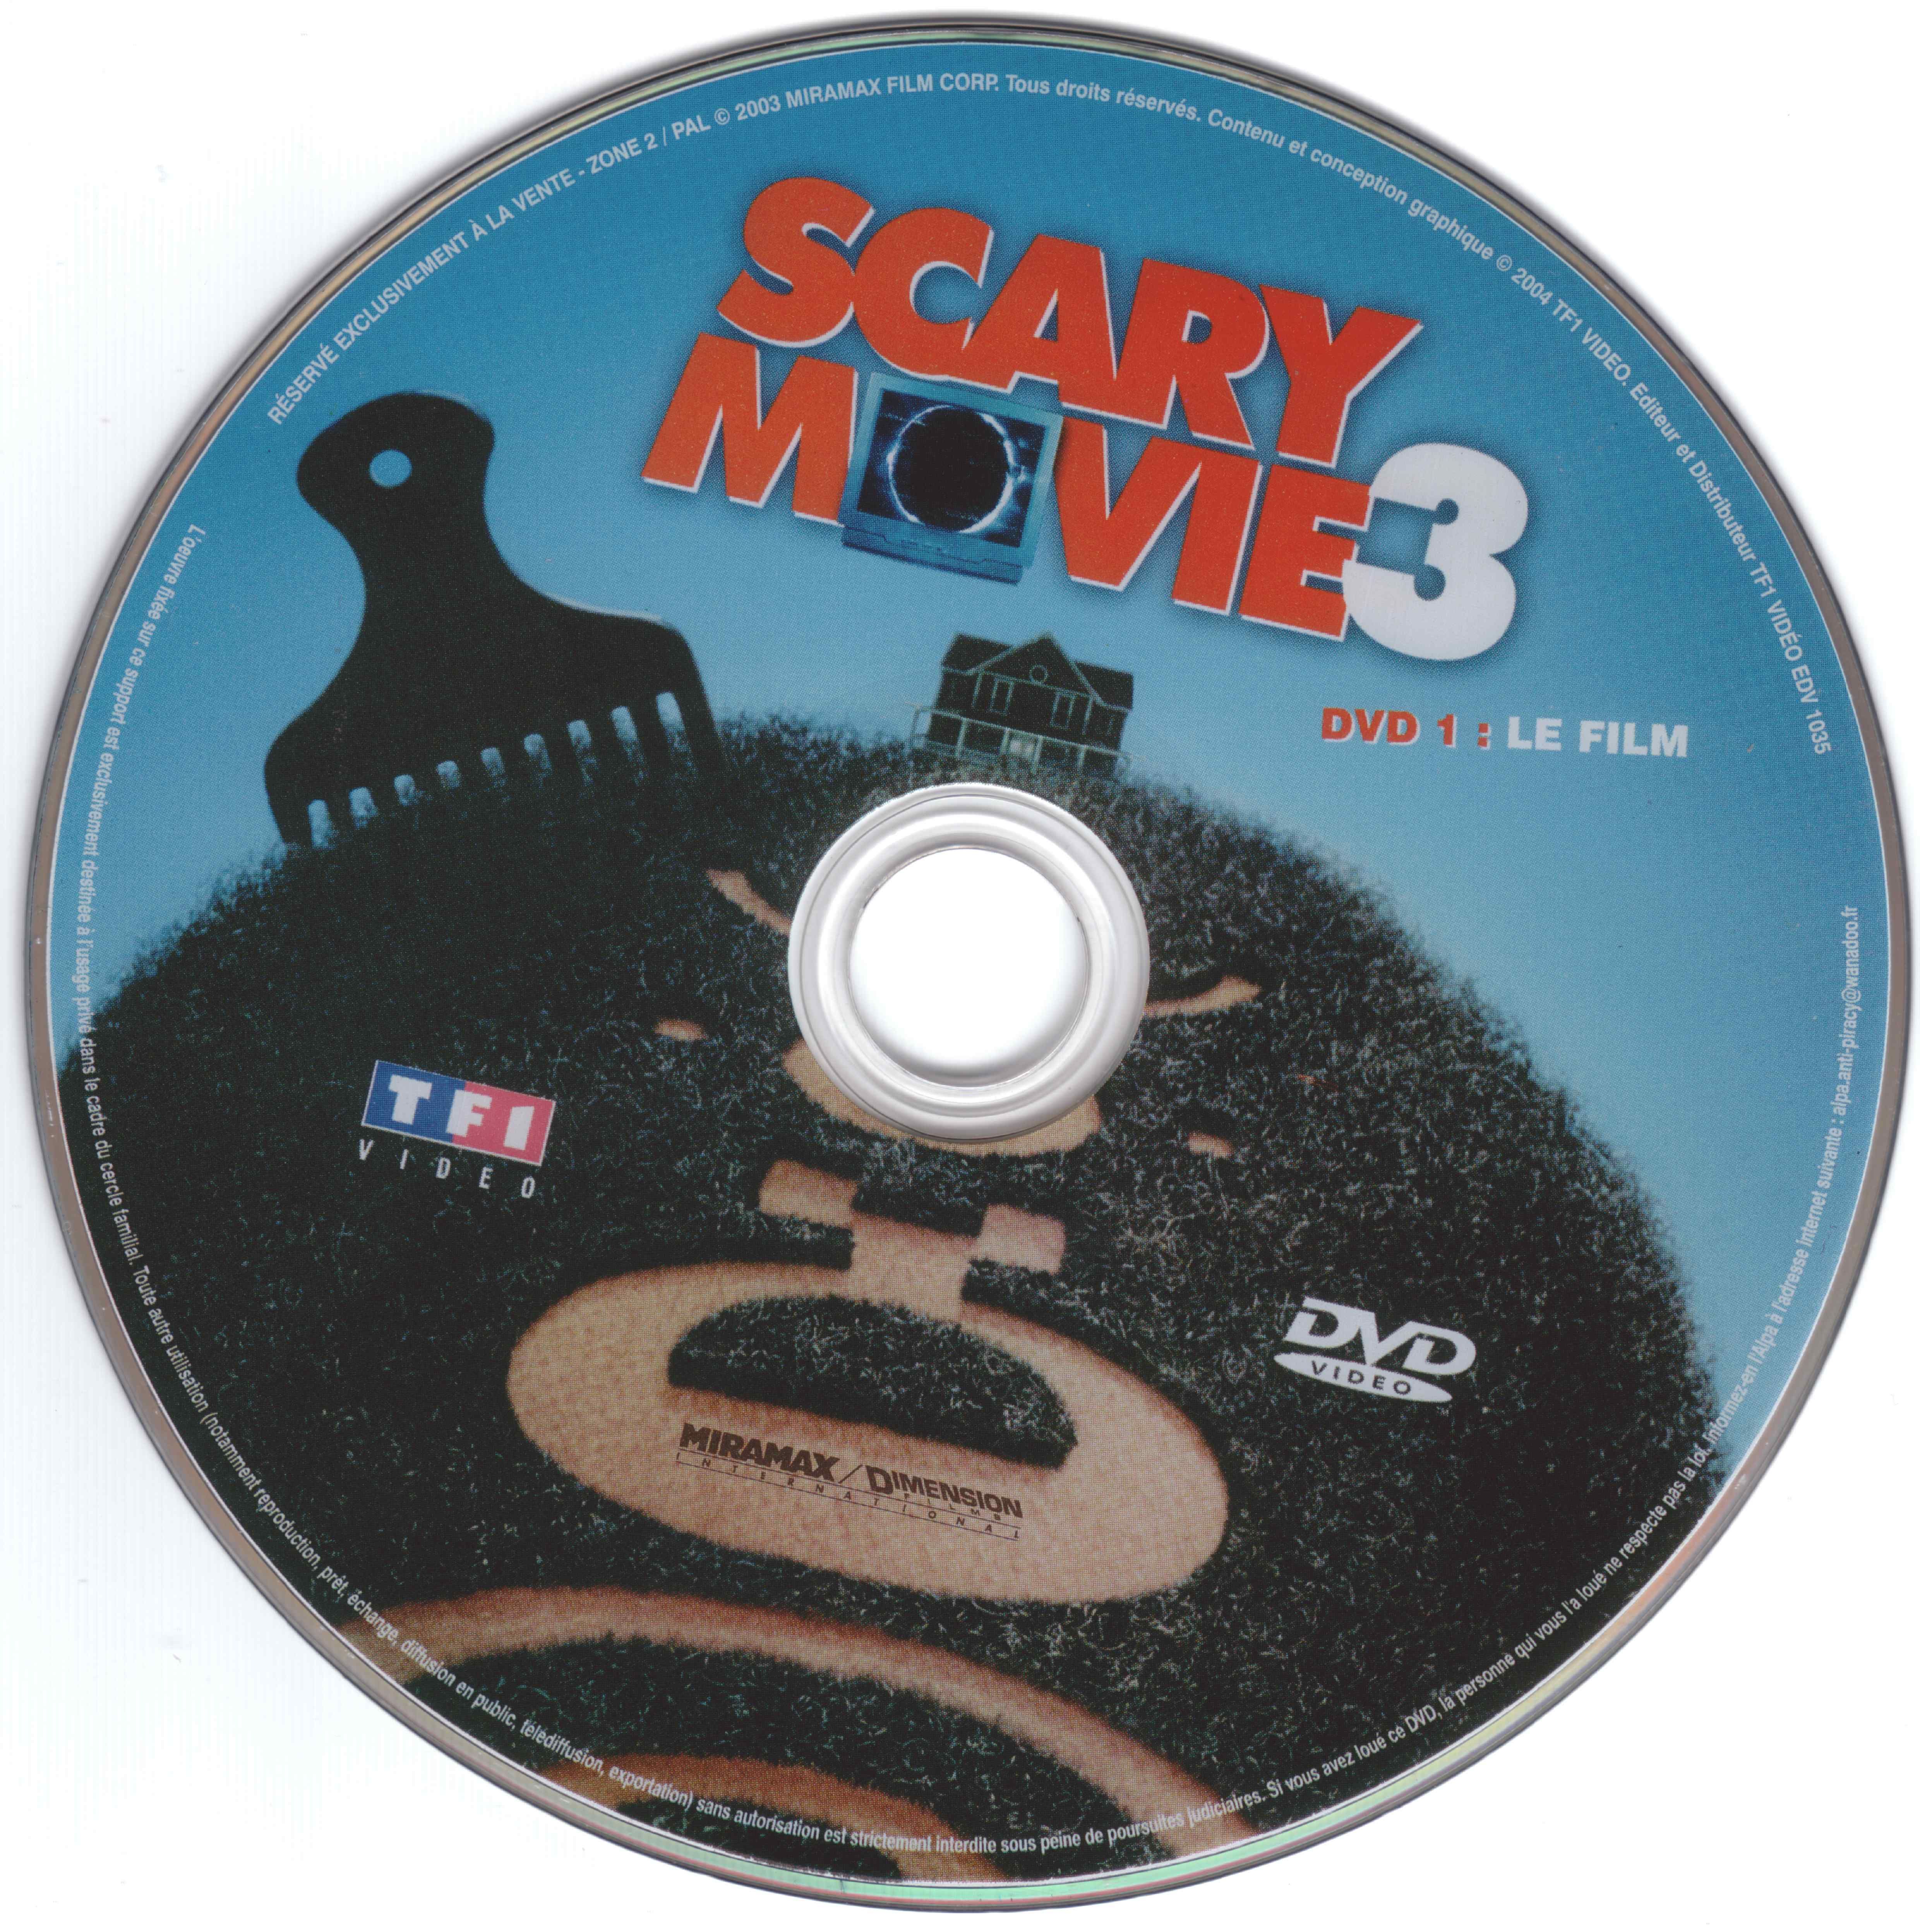 Scary movie 3 DISC 1